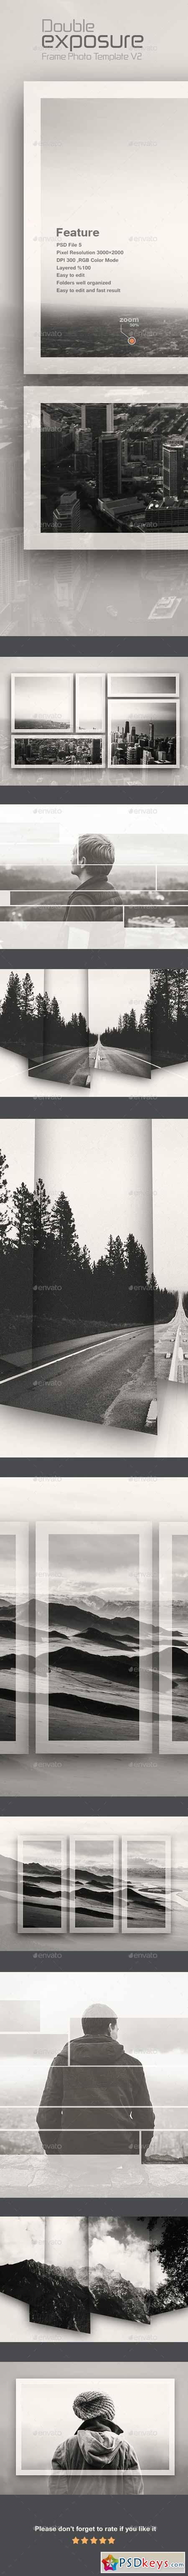 Double Exposure Frame Photo Template v2 11540742